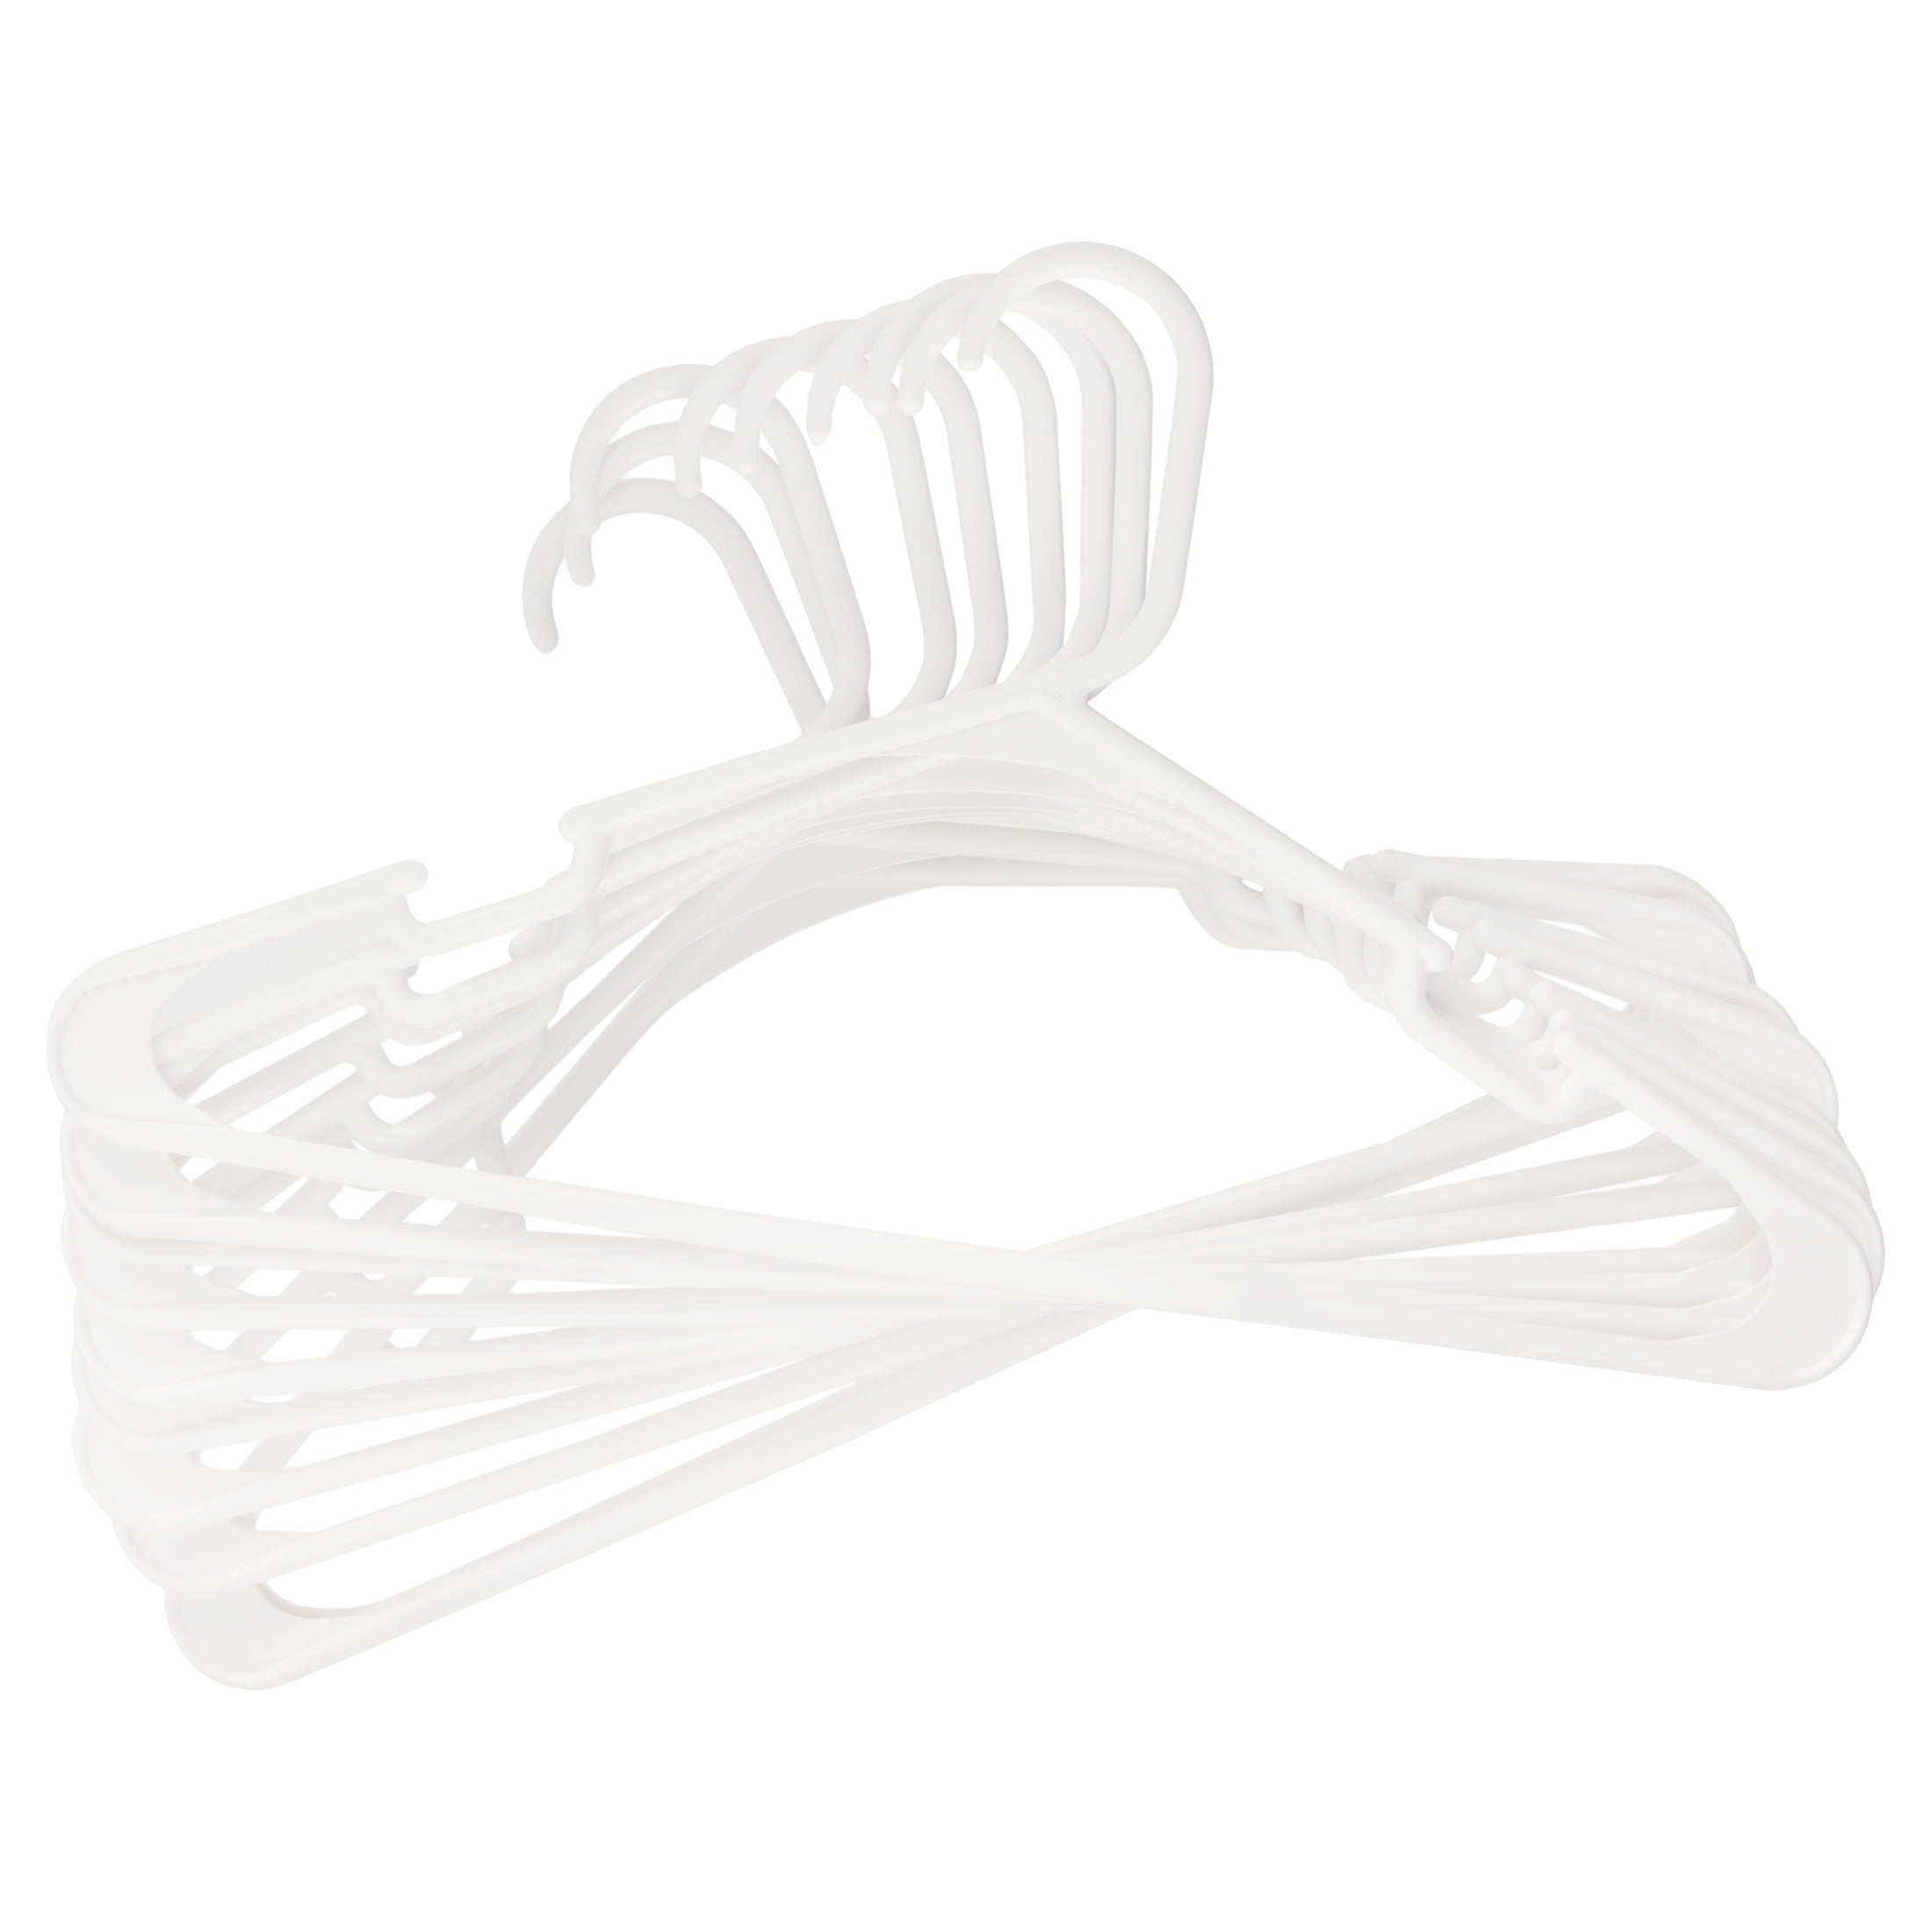  36pk Made in USA Heavy Duty Plastic Clothes Hangers